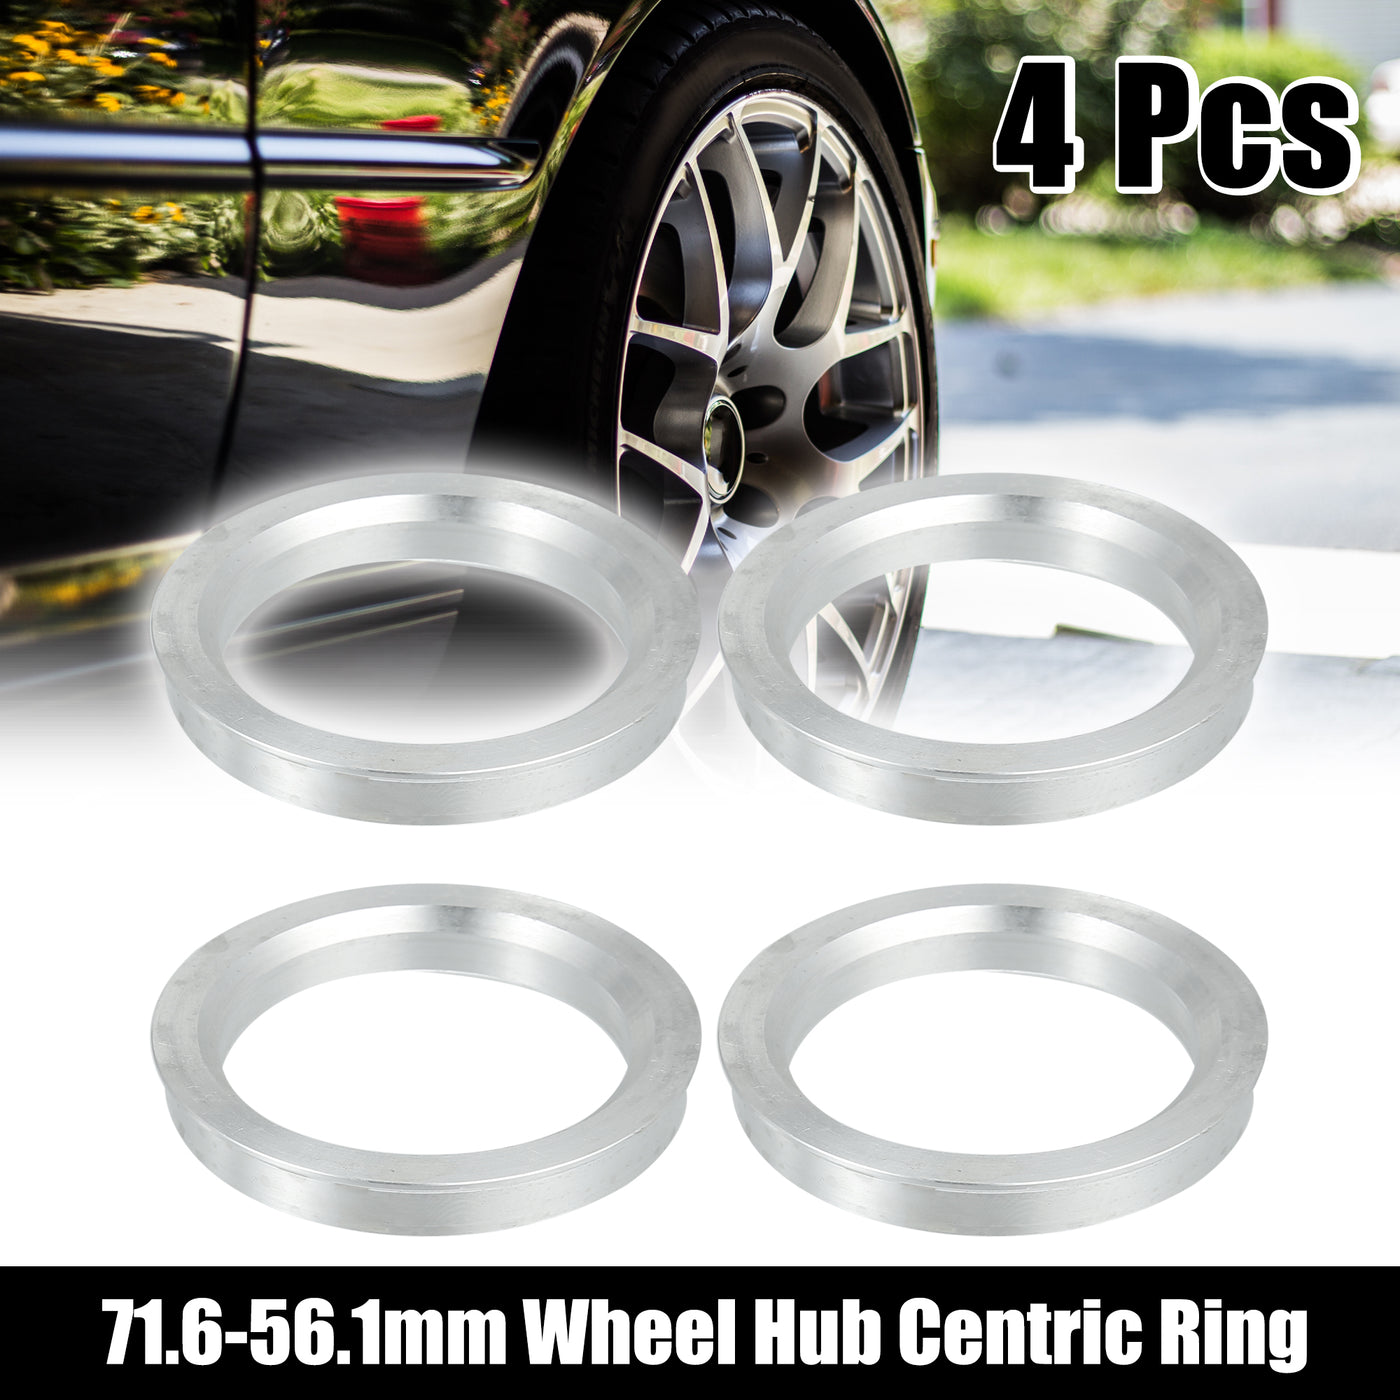 ACROPIX 71.6mm to 56.1mm Universal Car Hub Centric Rings Silver Tone - Pack of 4